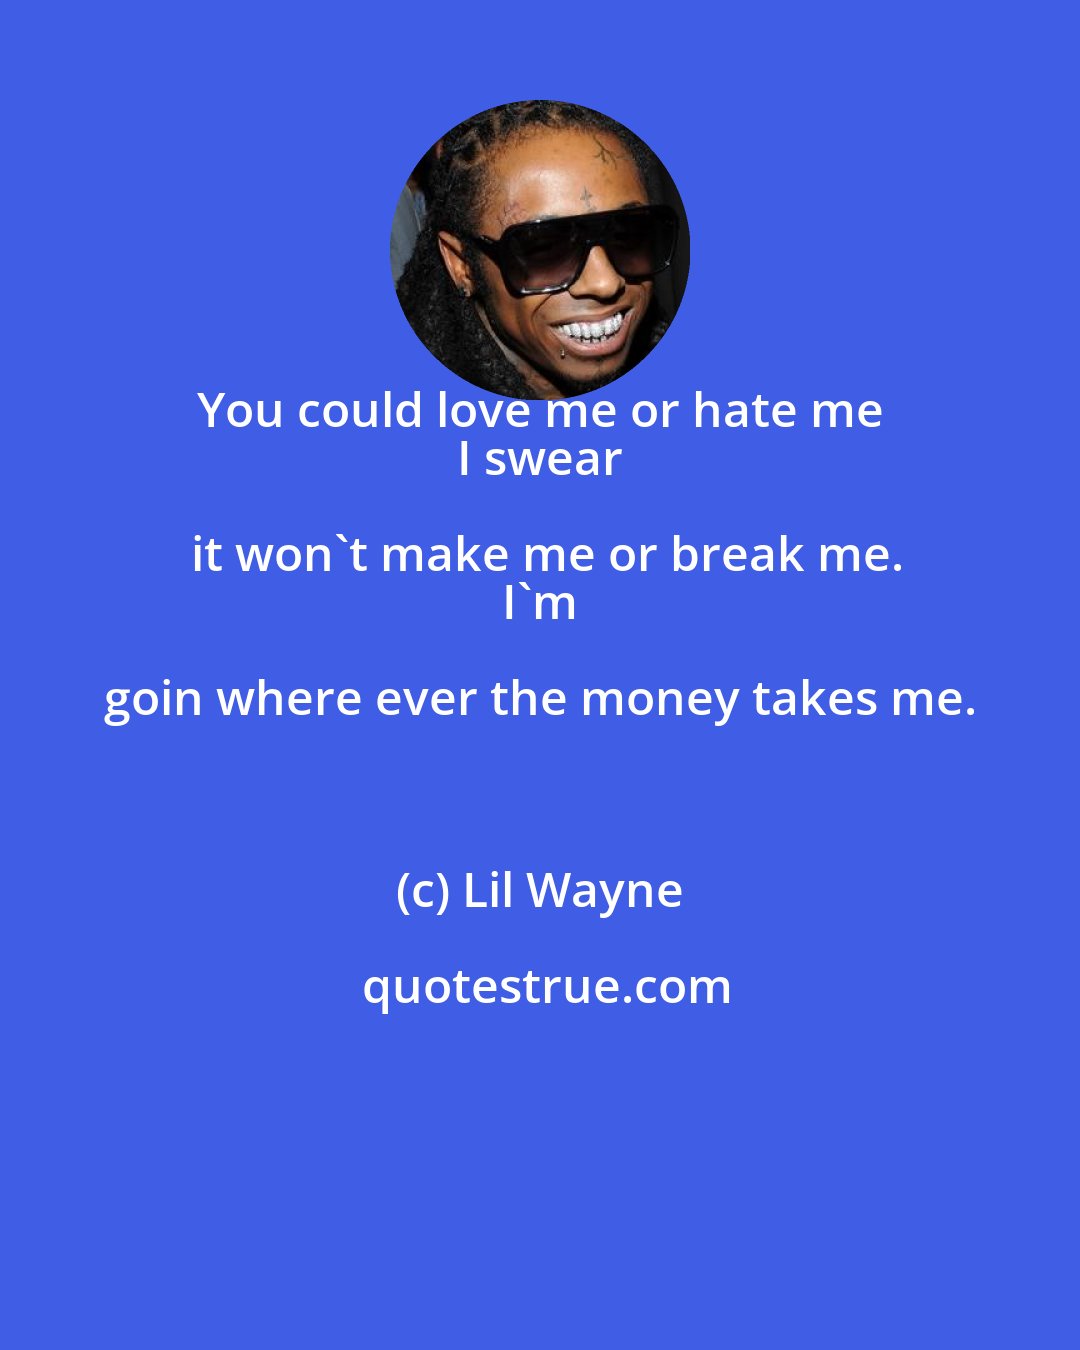 Lil Wayne: You could love me or hate me 
 I swear it won't make me or break me.
 I'm goin where ever the money takes me.